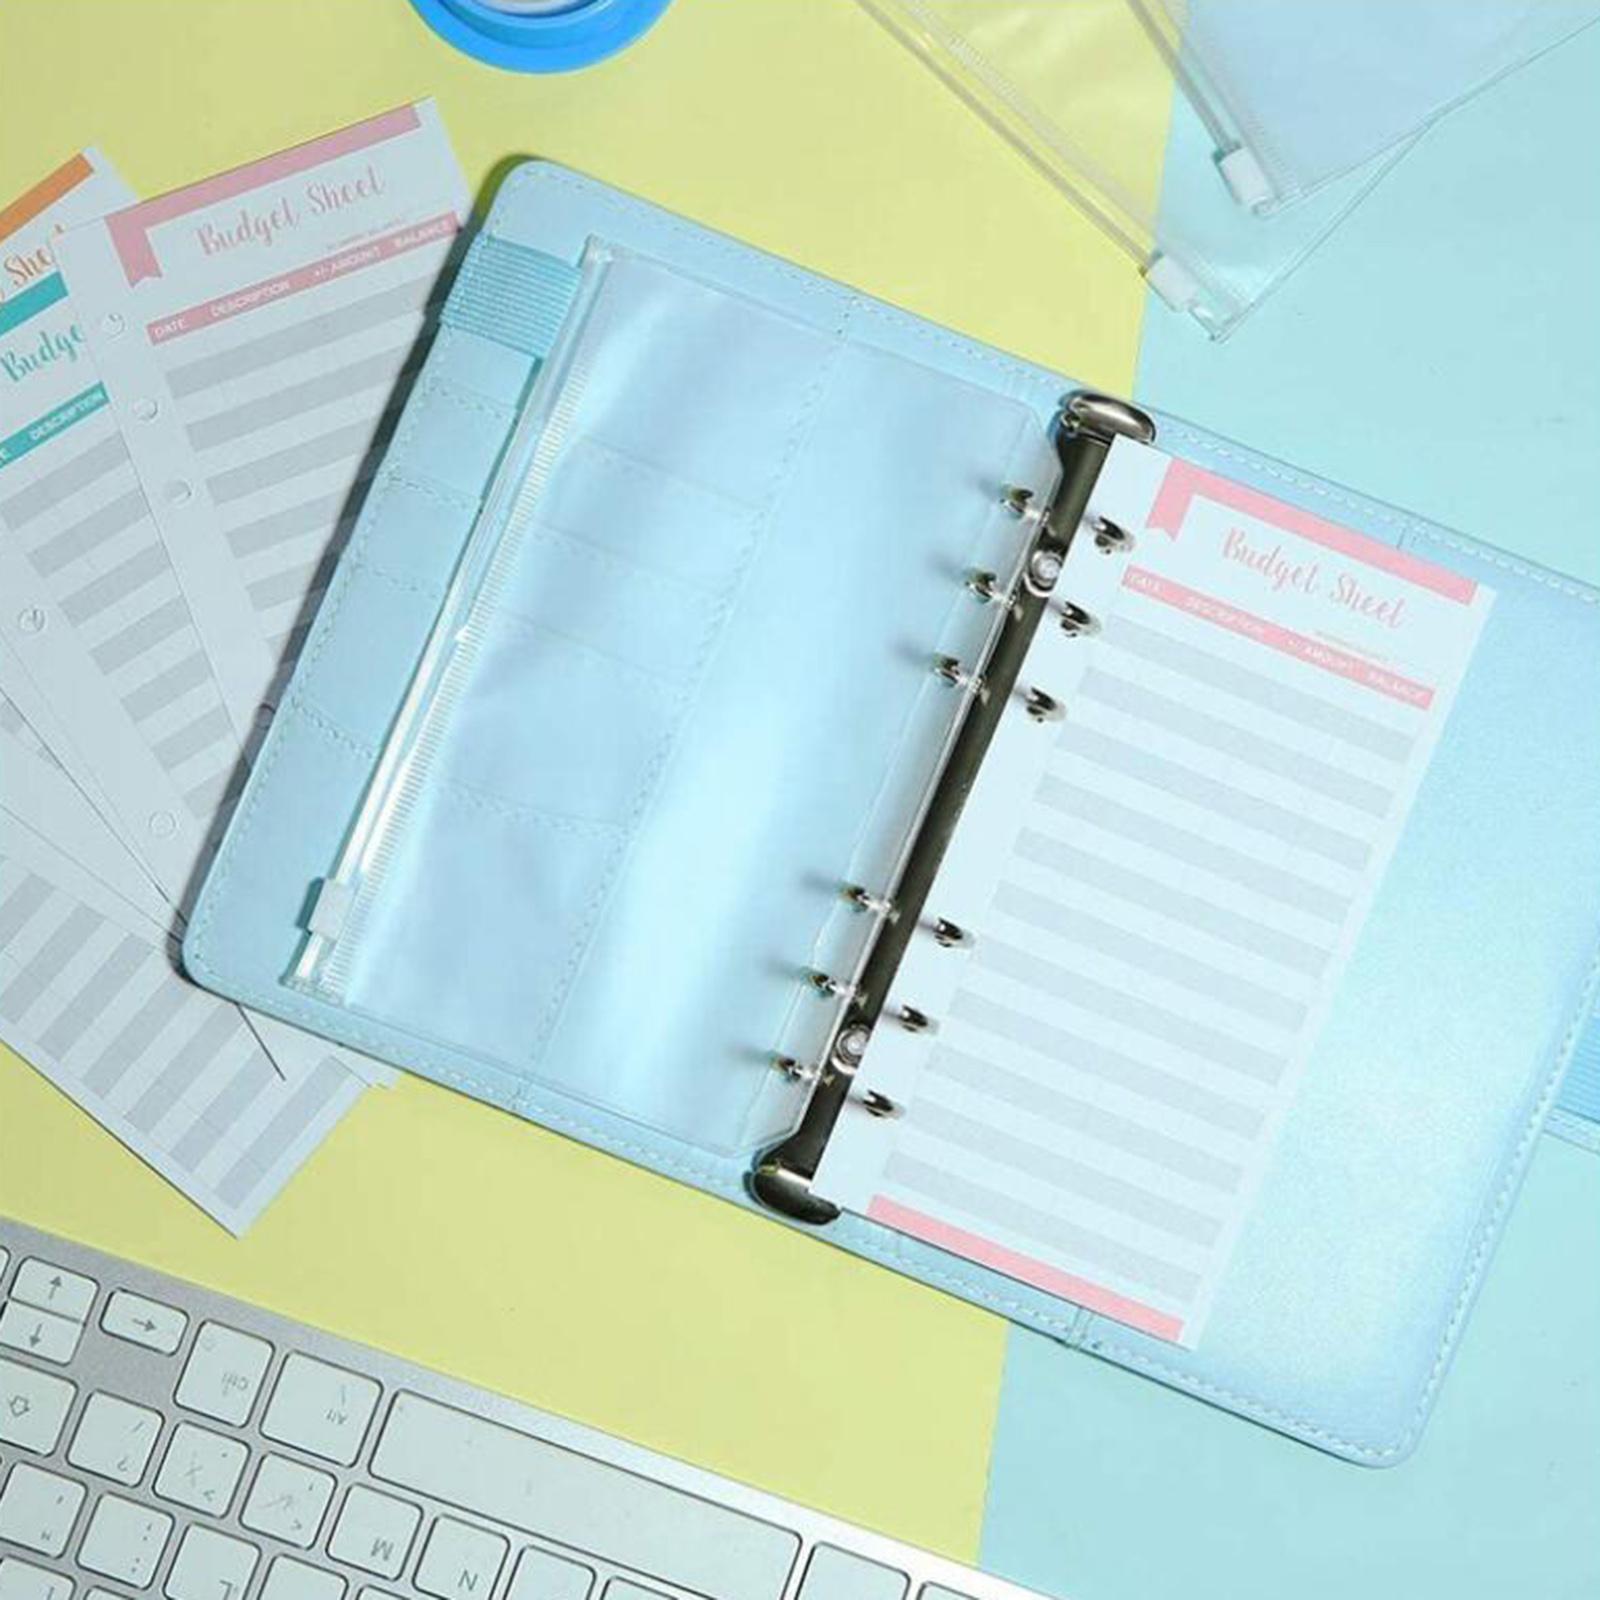 2x Notebook Binder with Binder Zipper Pockets for Home Office Gifts